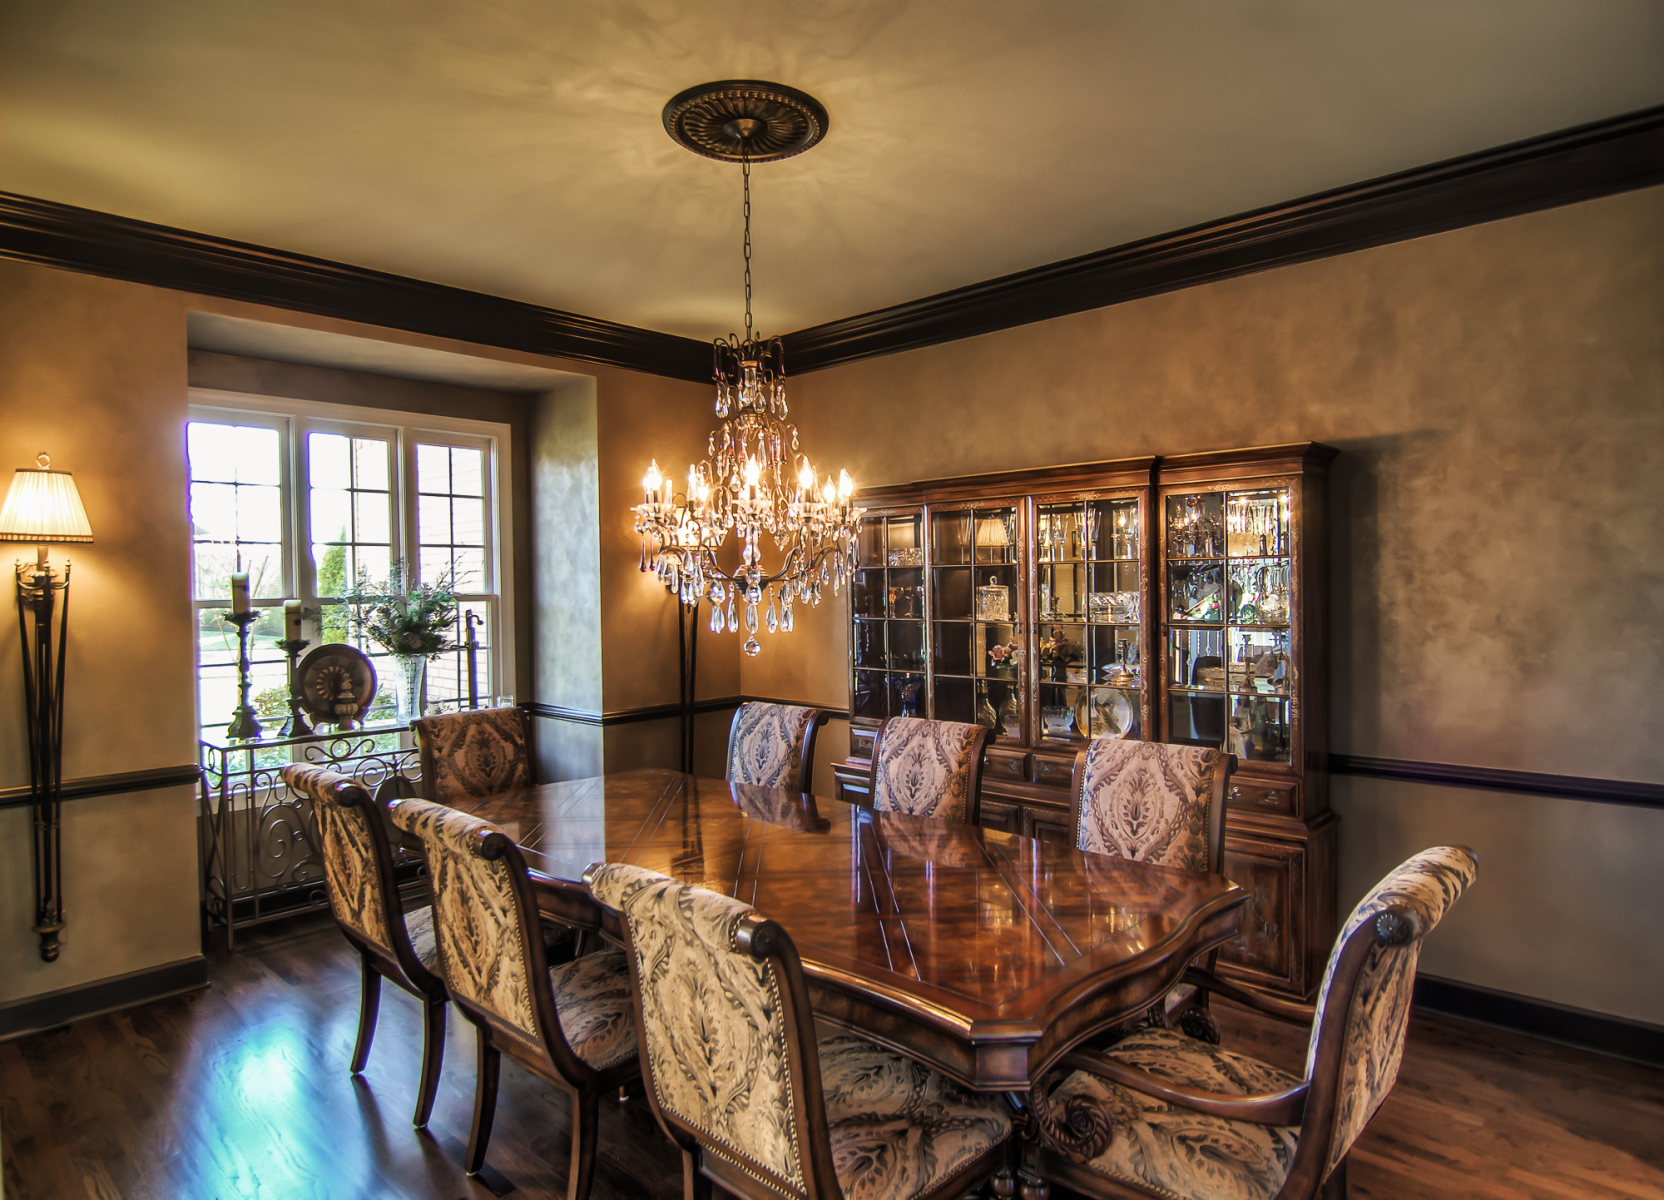 Custom blended Lusterstone for the wall finish and metallic bronze wood trim was used to achieve this elegant Franklin, TN customer’s dining room makeover.